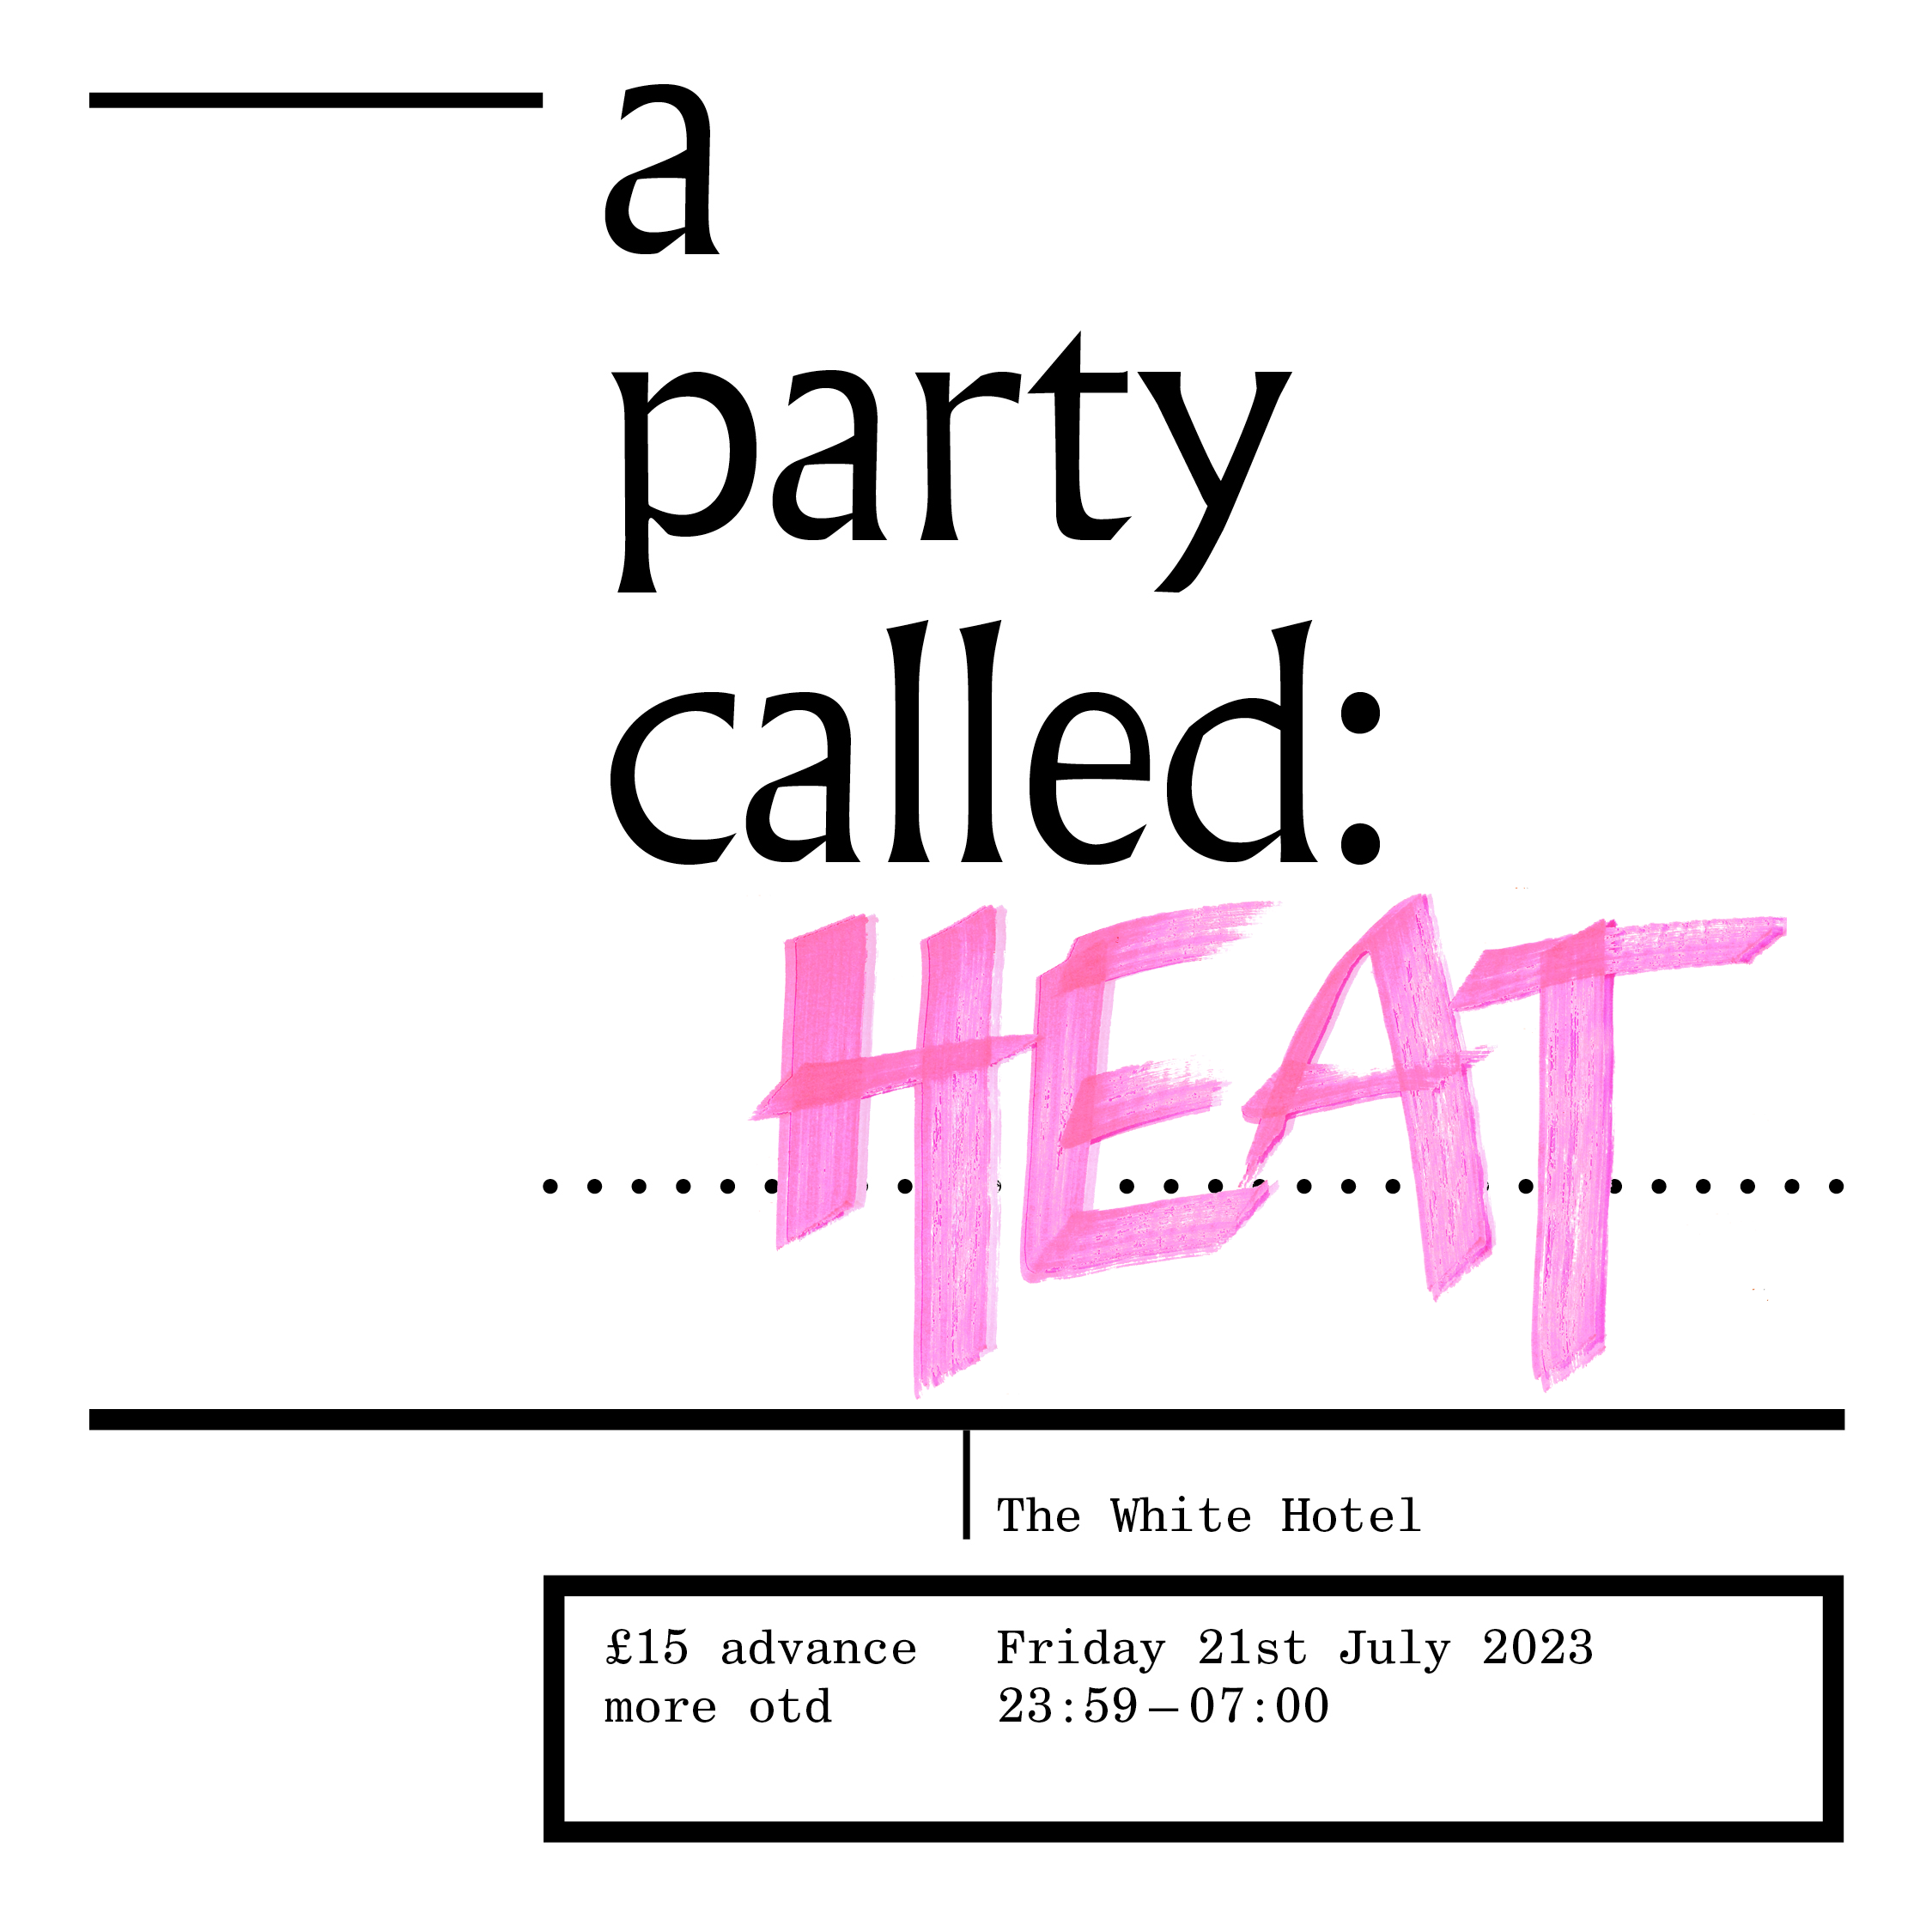 a party called: Heat - Página frontal